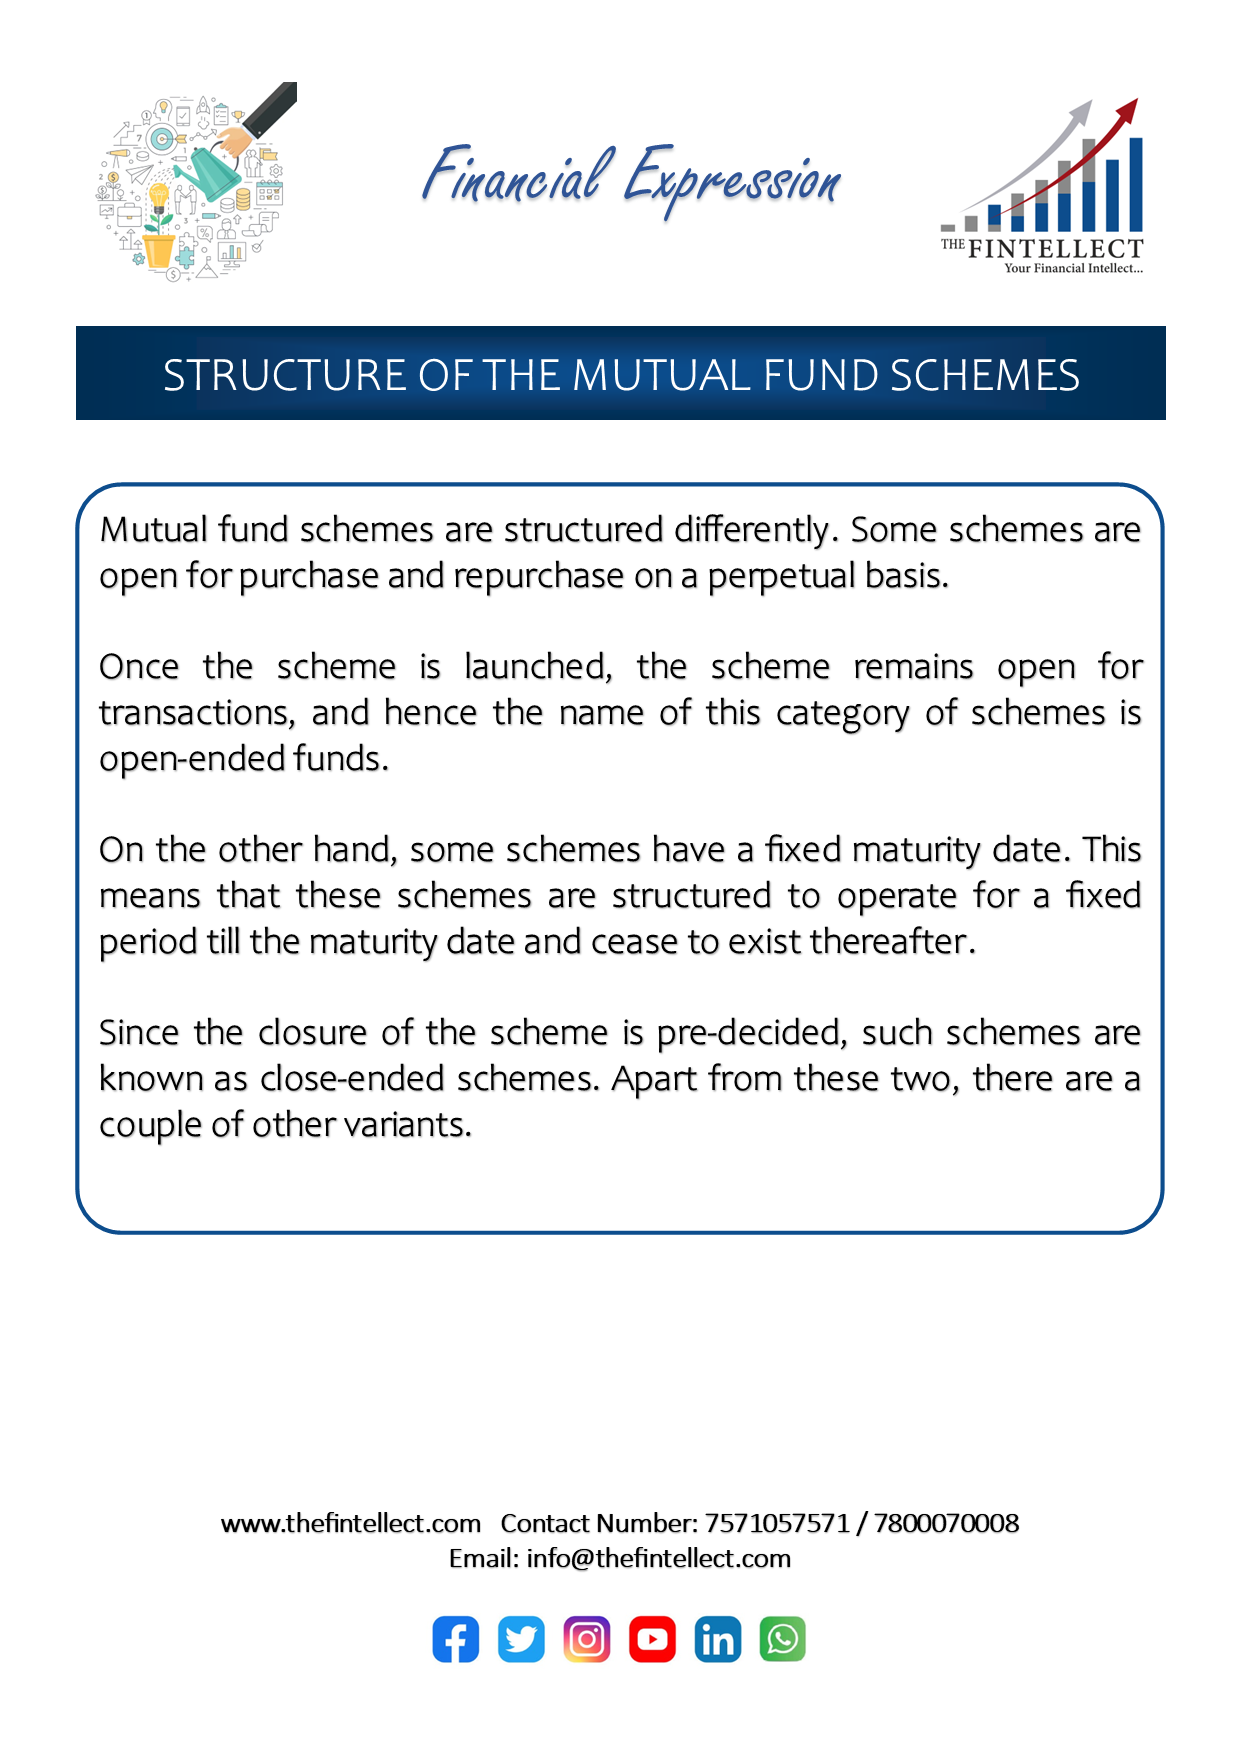 8840491_STRUCTURE OF THE MUTUAL FUND SCHEMES.png